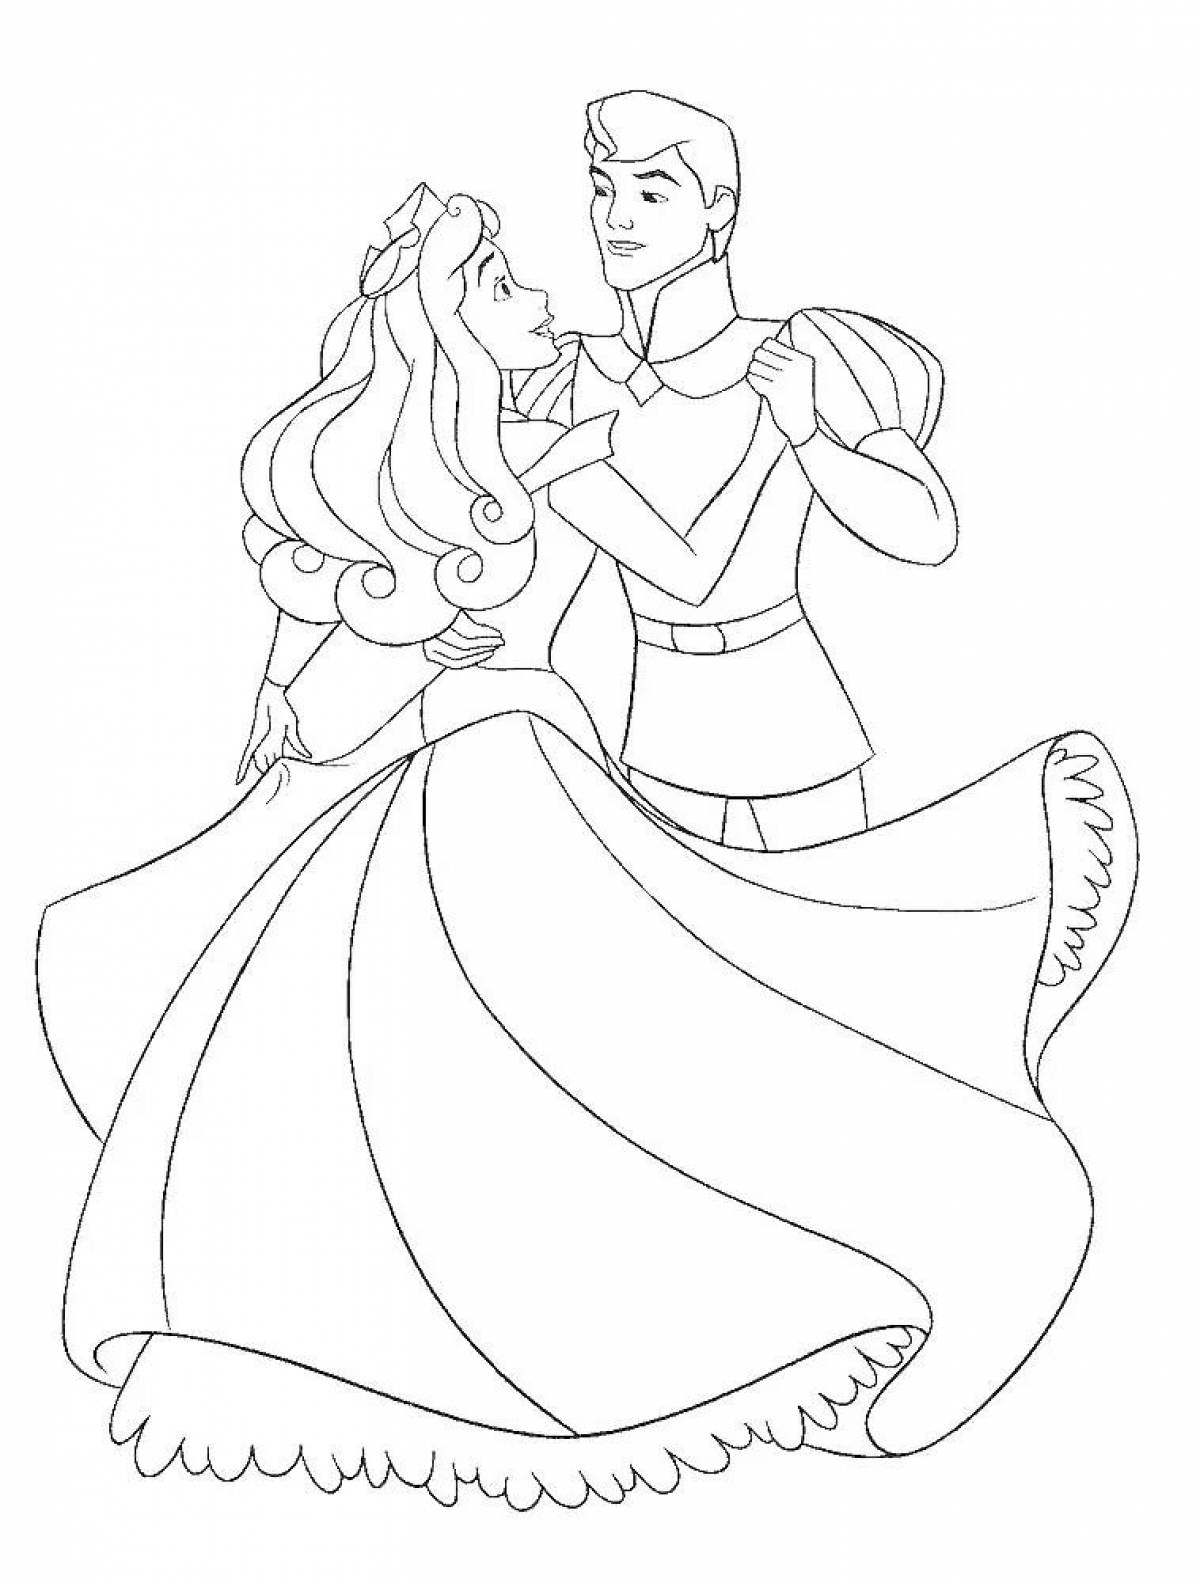 Generous princess and prince coloring book for kids